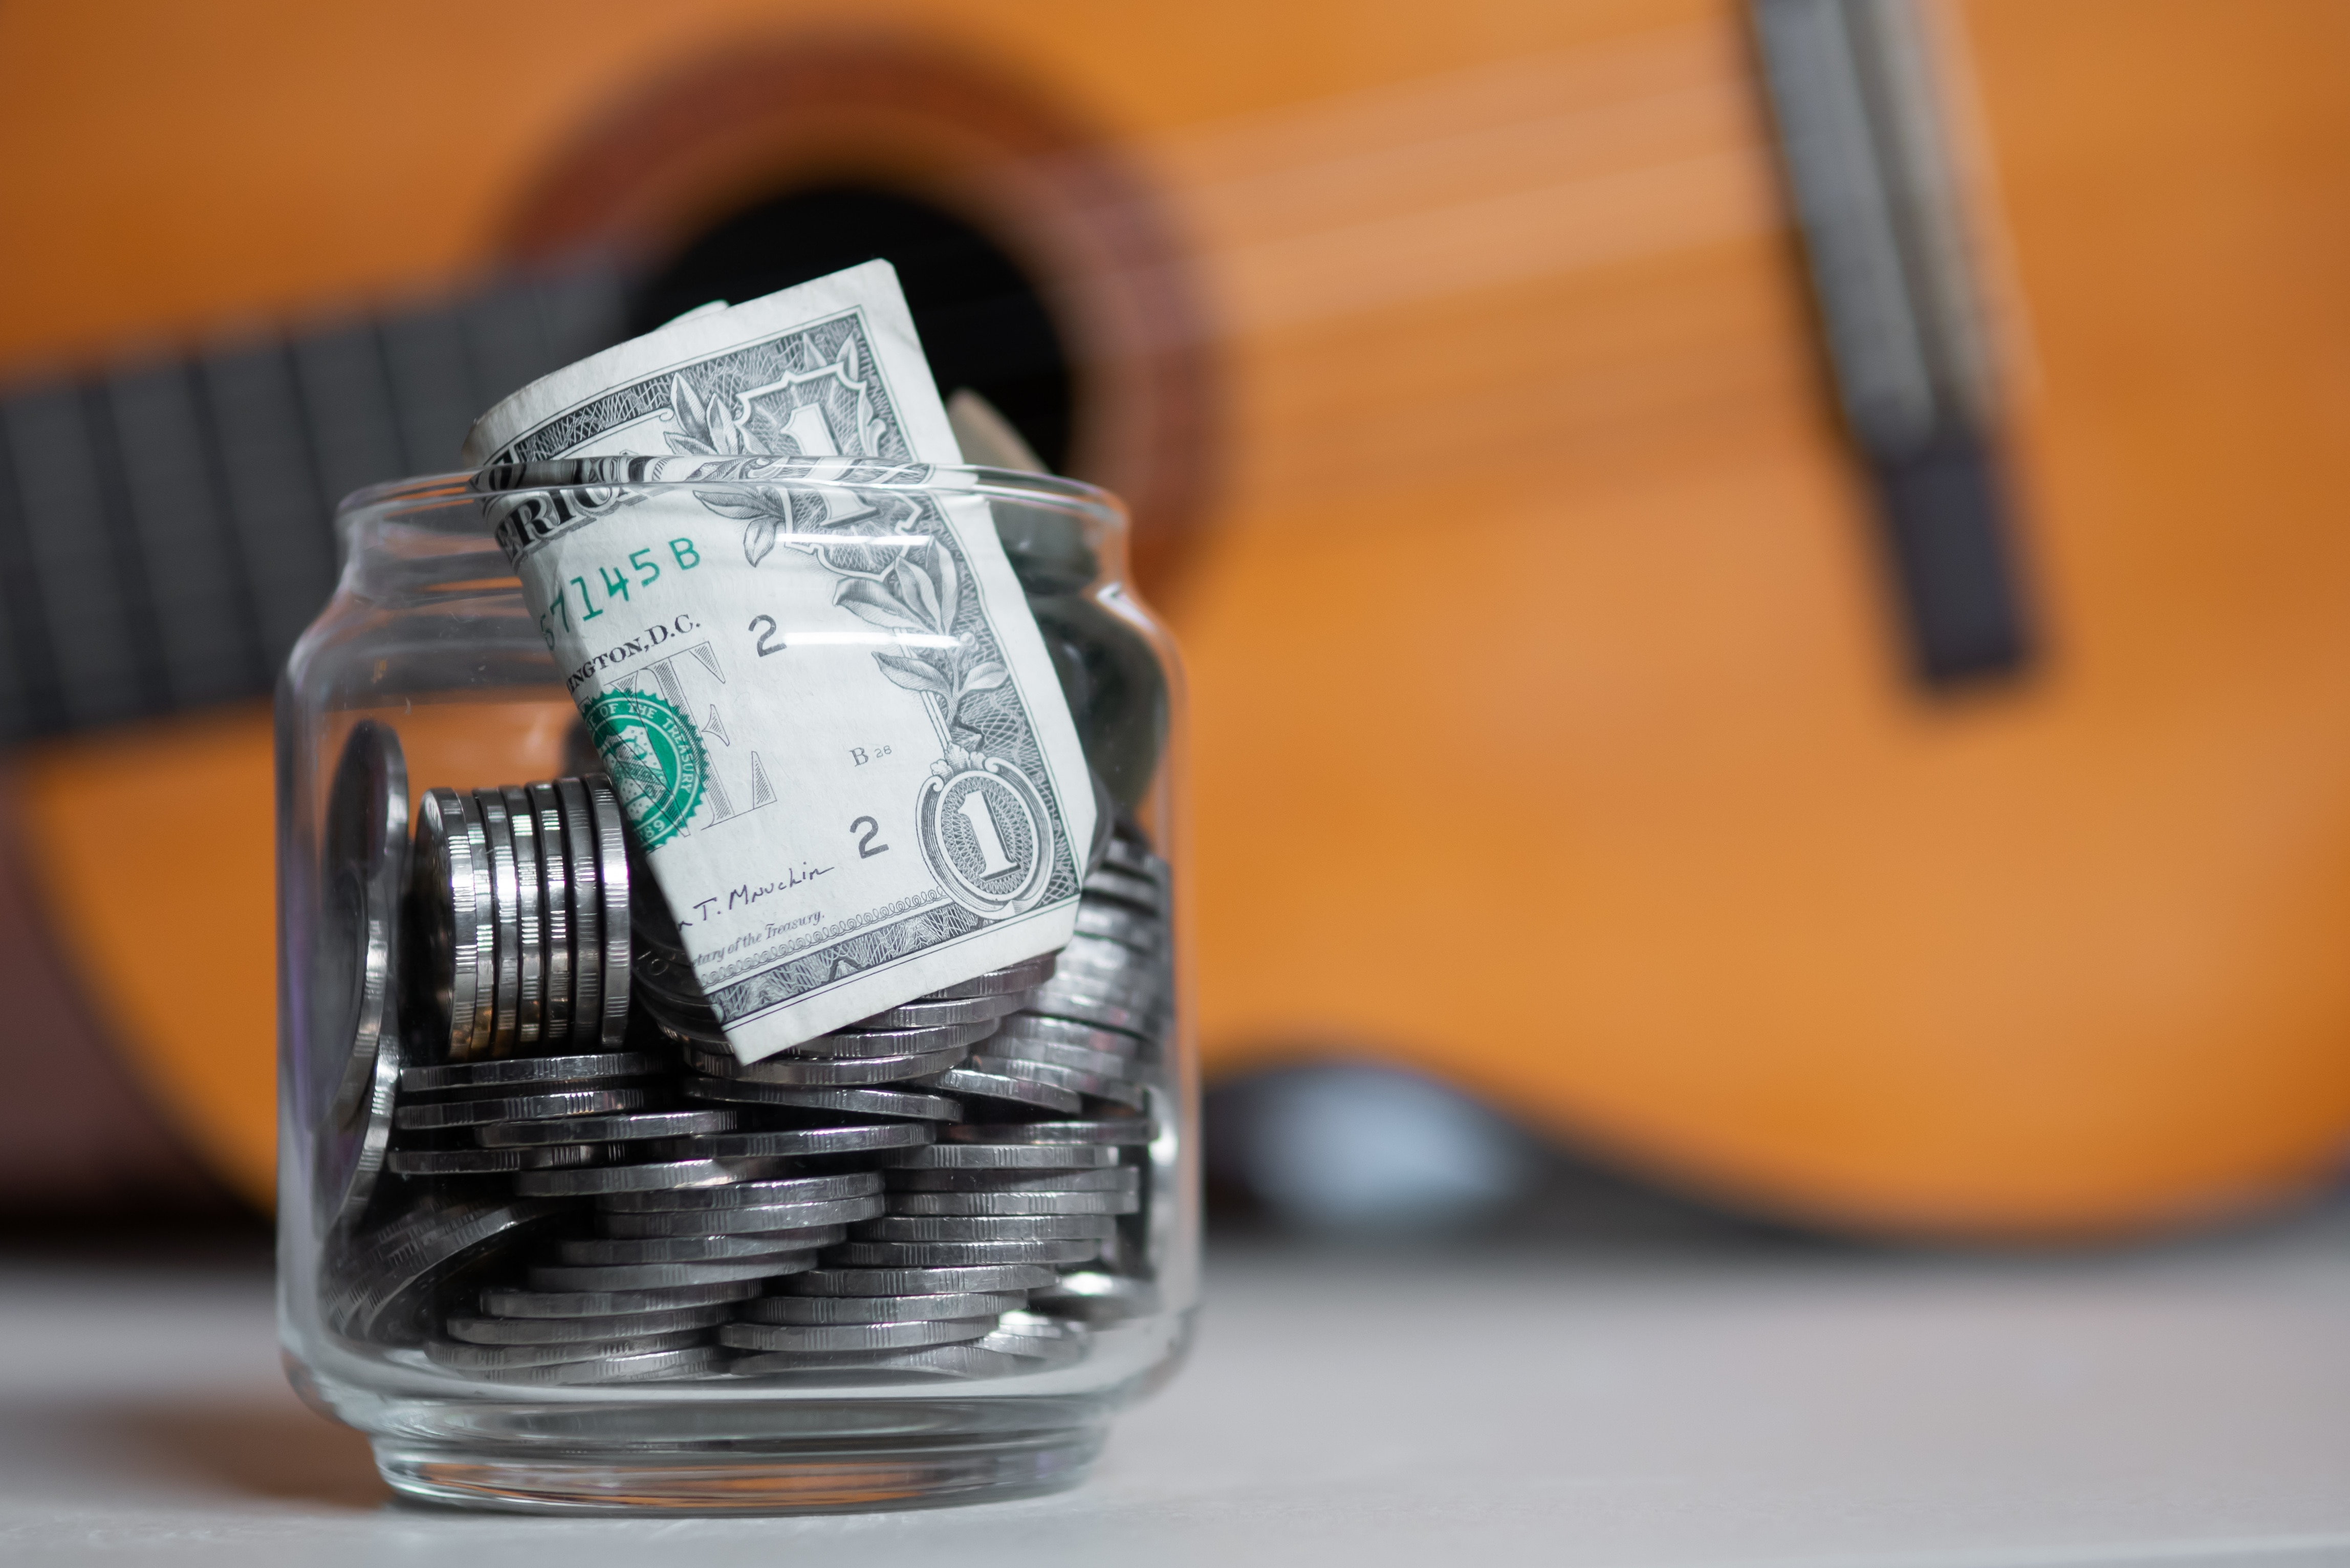 [RS+] How Much Do Guitar Lessons Cost? SEO ARTICLE - What factors affect the cost of guitar lessons